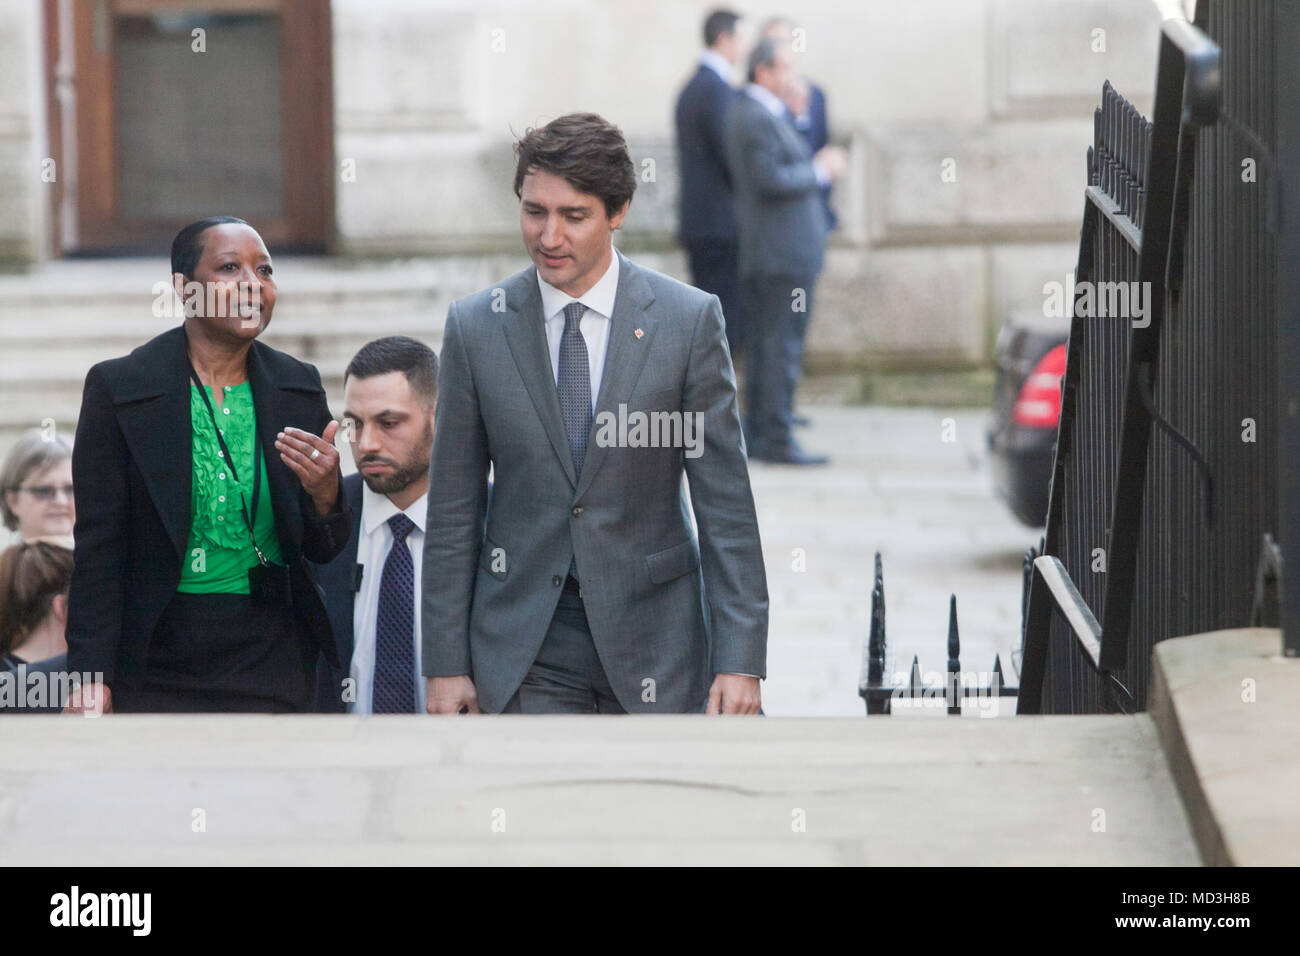 London UK. 18th April 2018. Canadian Prime Minister Justin Trudeau arrives at Downing Street for a meeting with his counterpart British PM Theresa May as part of the Commonwealth Heads of Government meetings Credit: amer ghazzal/Alamy Live News Stock Photo